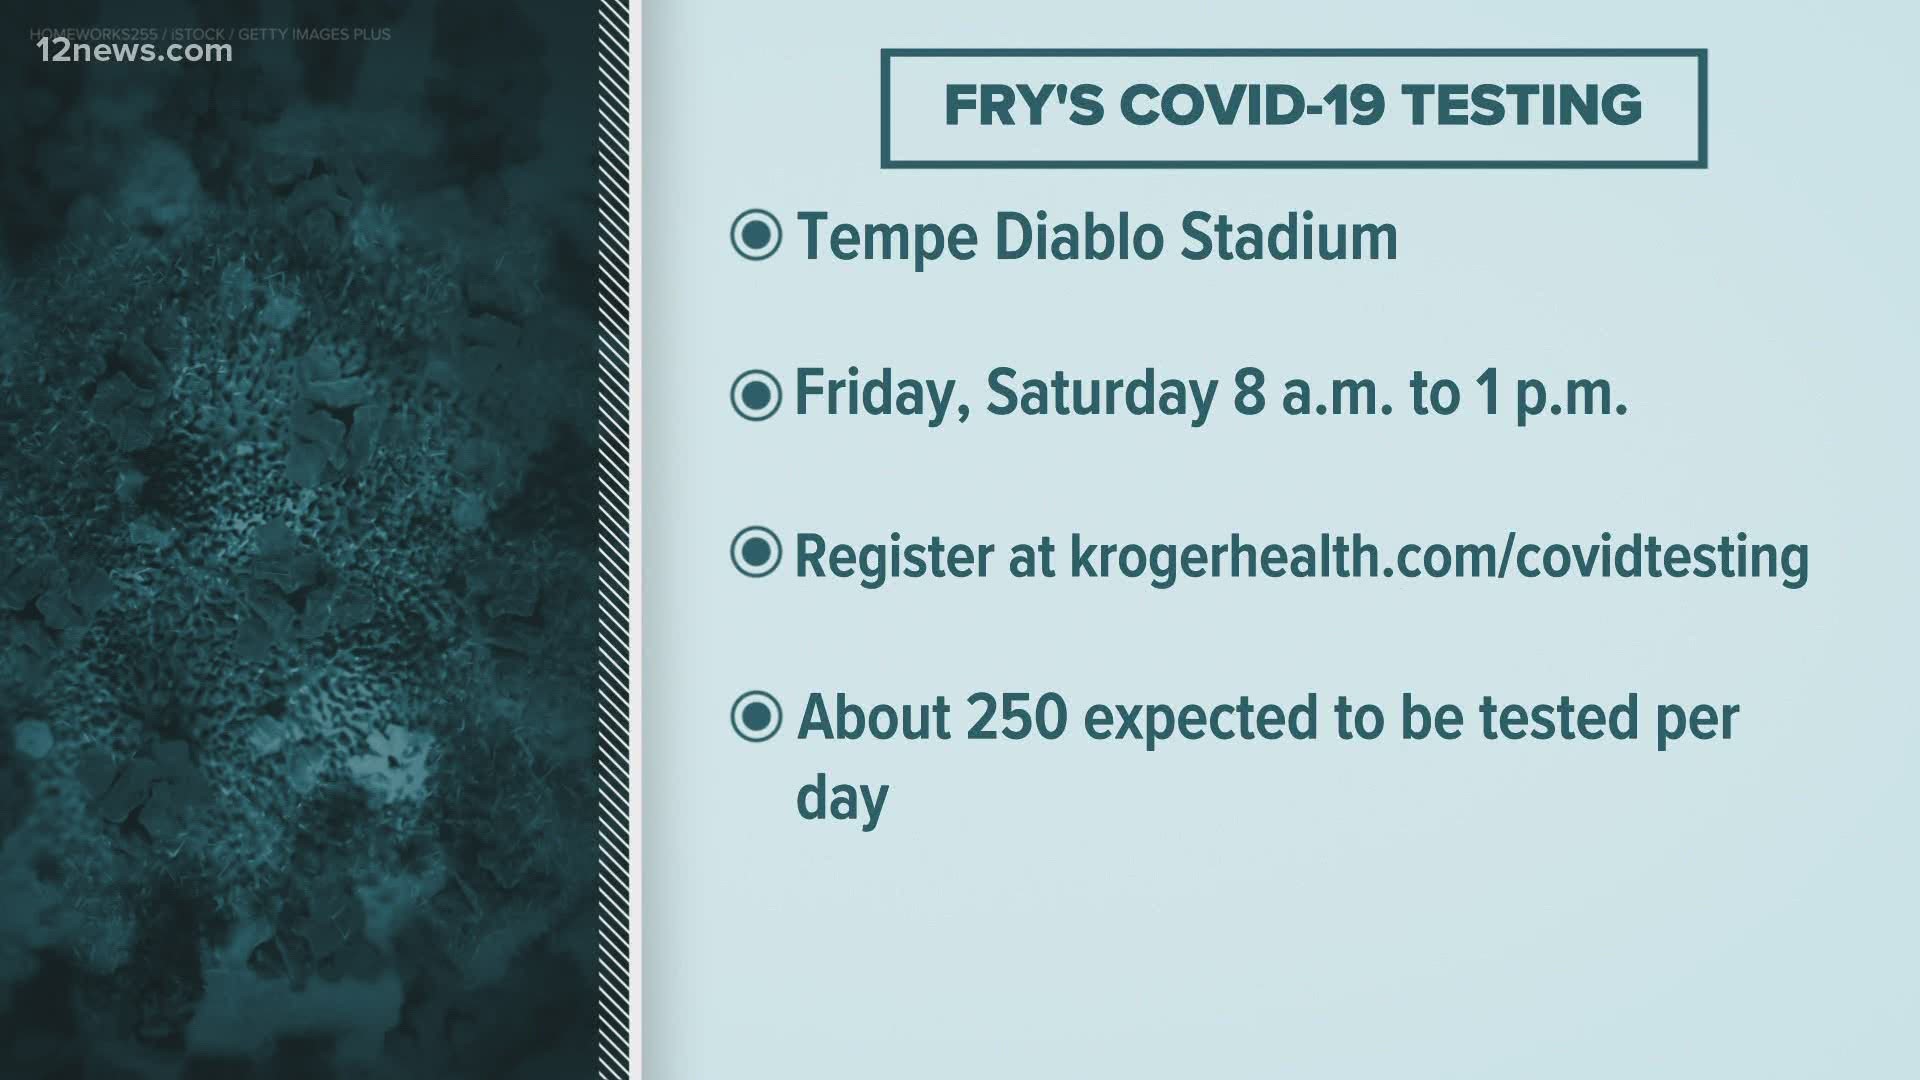 Free, drive-thru testing for the coronavirus will be held this Friday and Saturday from 8a.m. to 1 p.m. at Tempe Diablo Stadium. You can register at krogerhealth.com